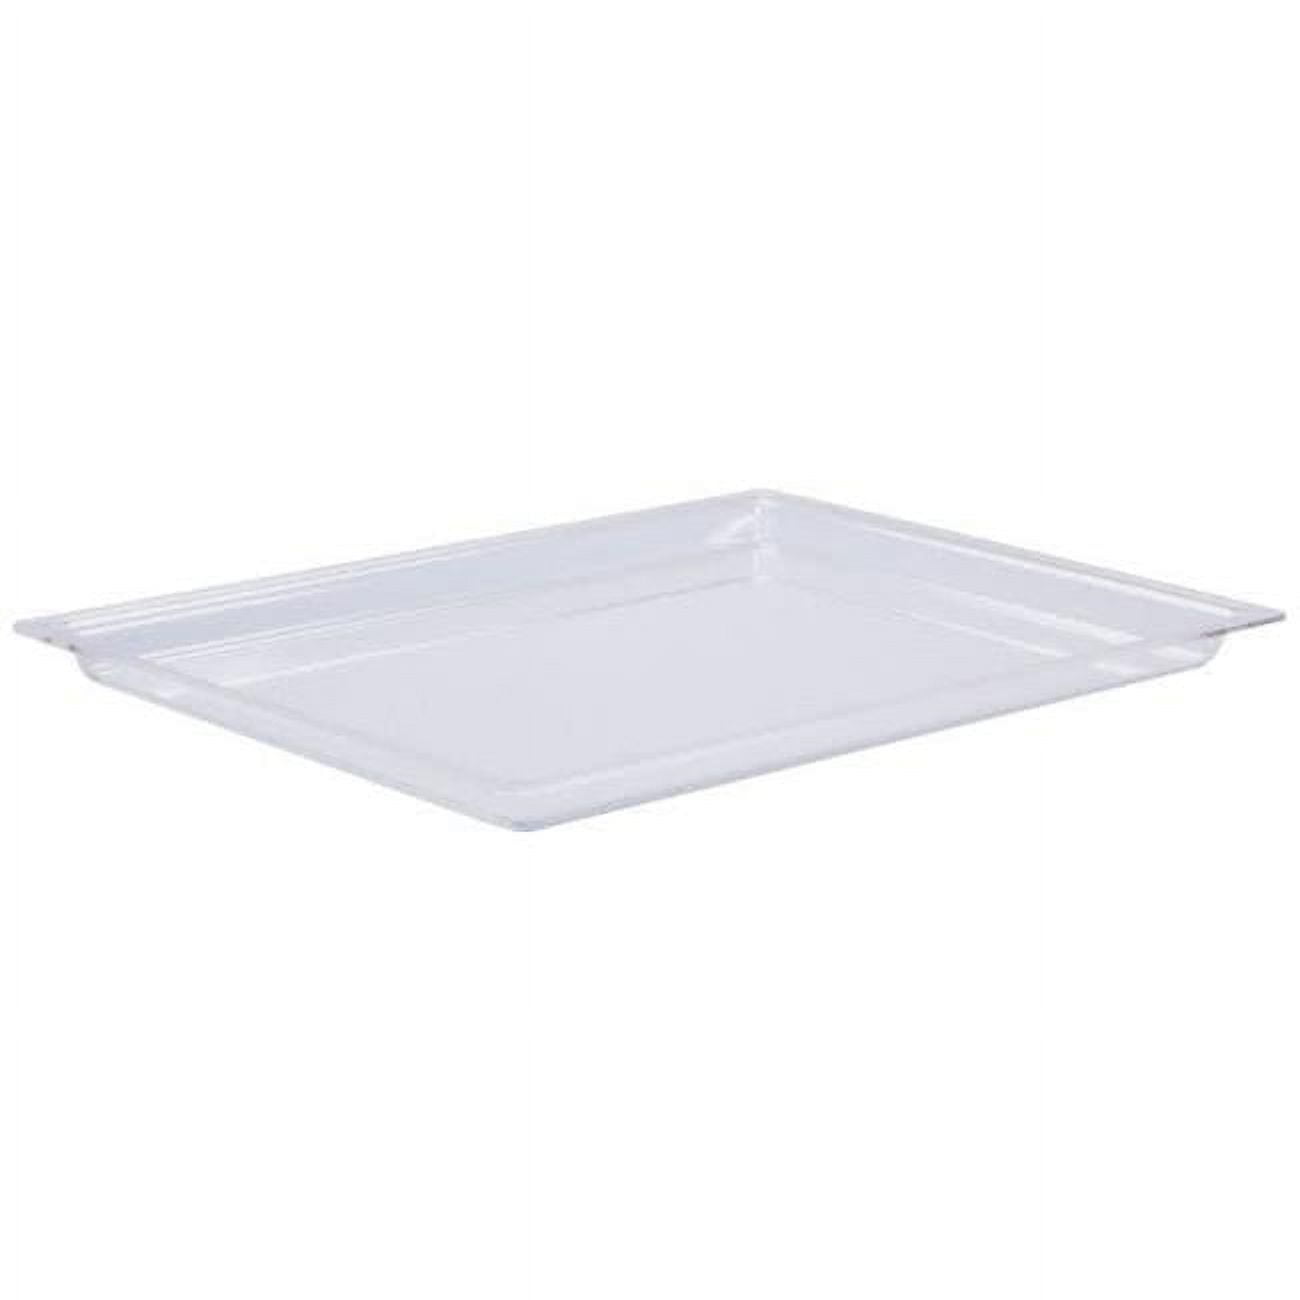 Cescolite Heavy-Weight Plastic Developing Tray (30 x 40 x 3, White)